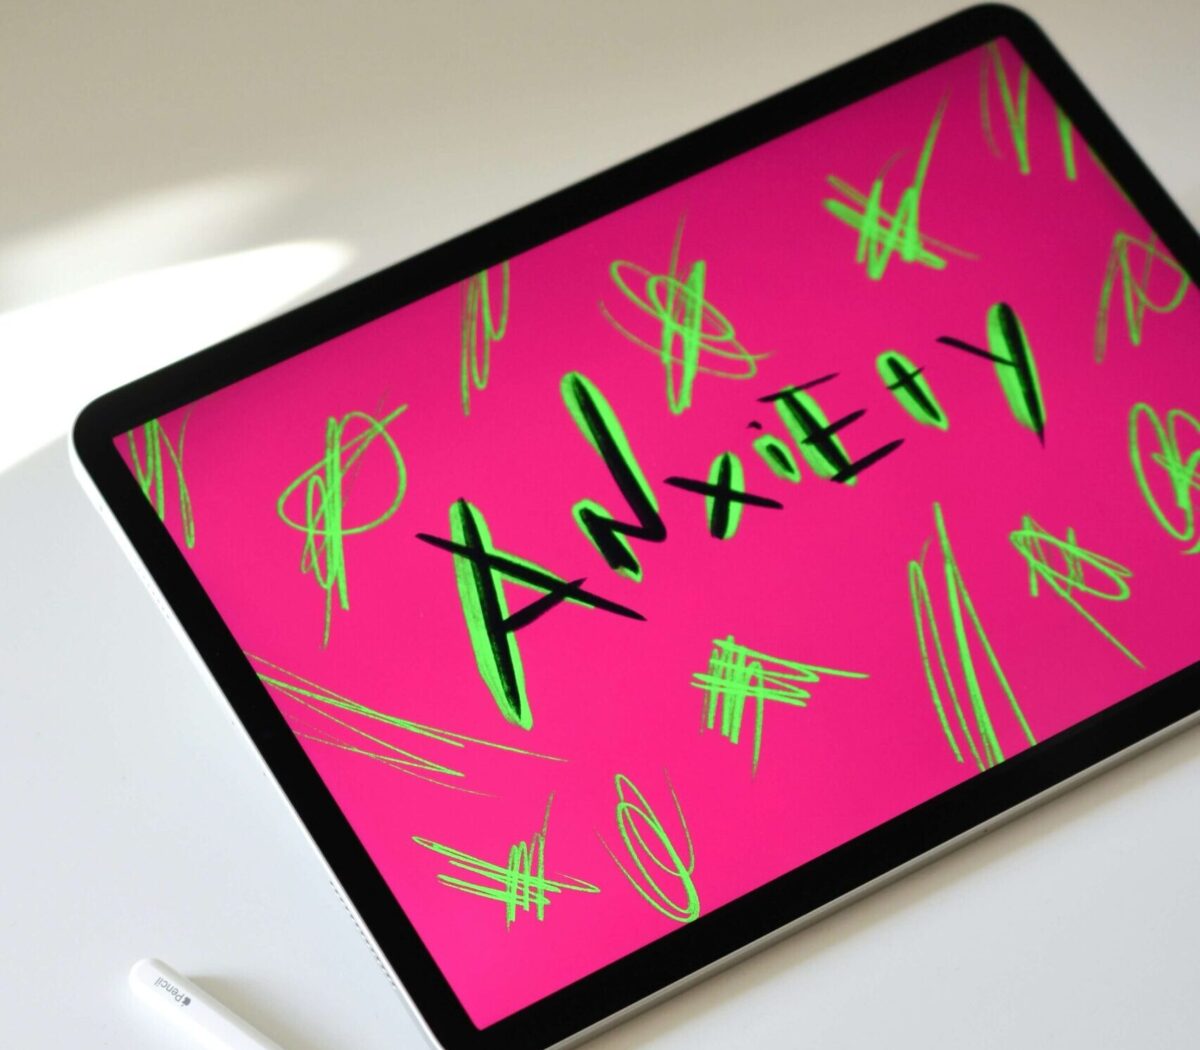 Anxiety written on a pink tablet